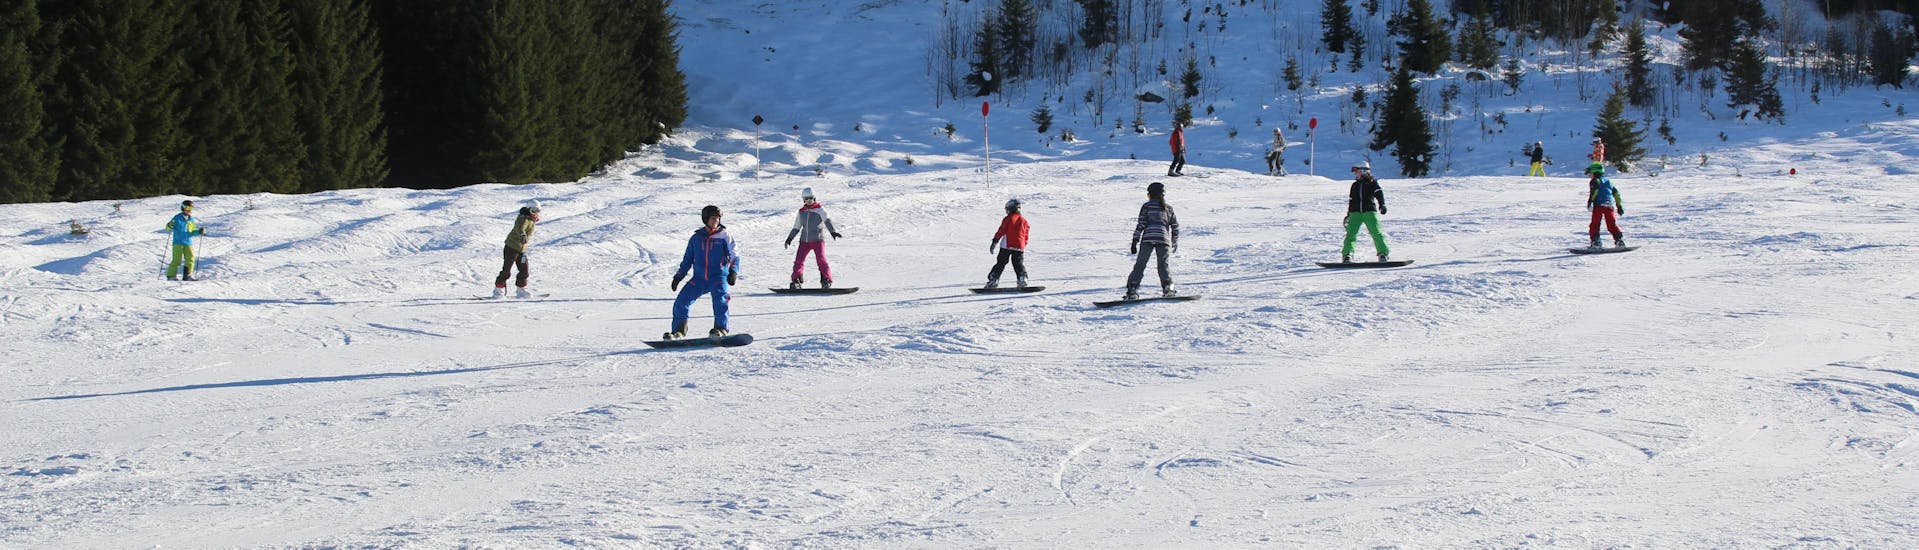 Snowboarders on the slope at Snowboarding Lessons for Teens & Adults of All Levels from Ski & Snowboard School Ostrachtal.